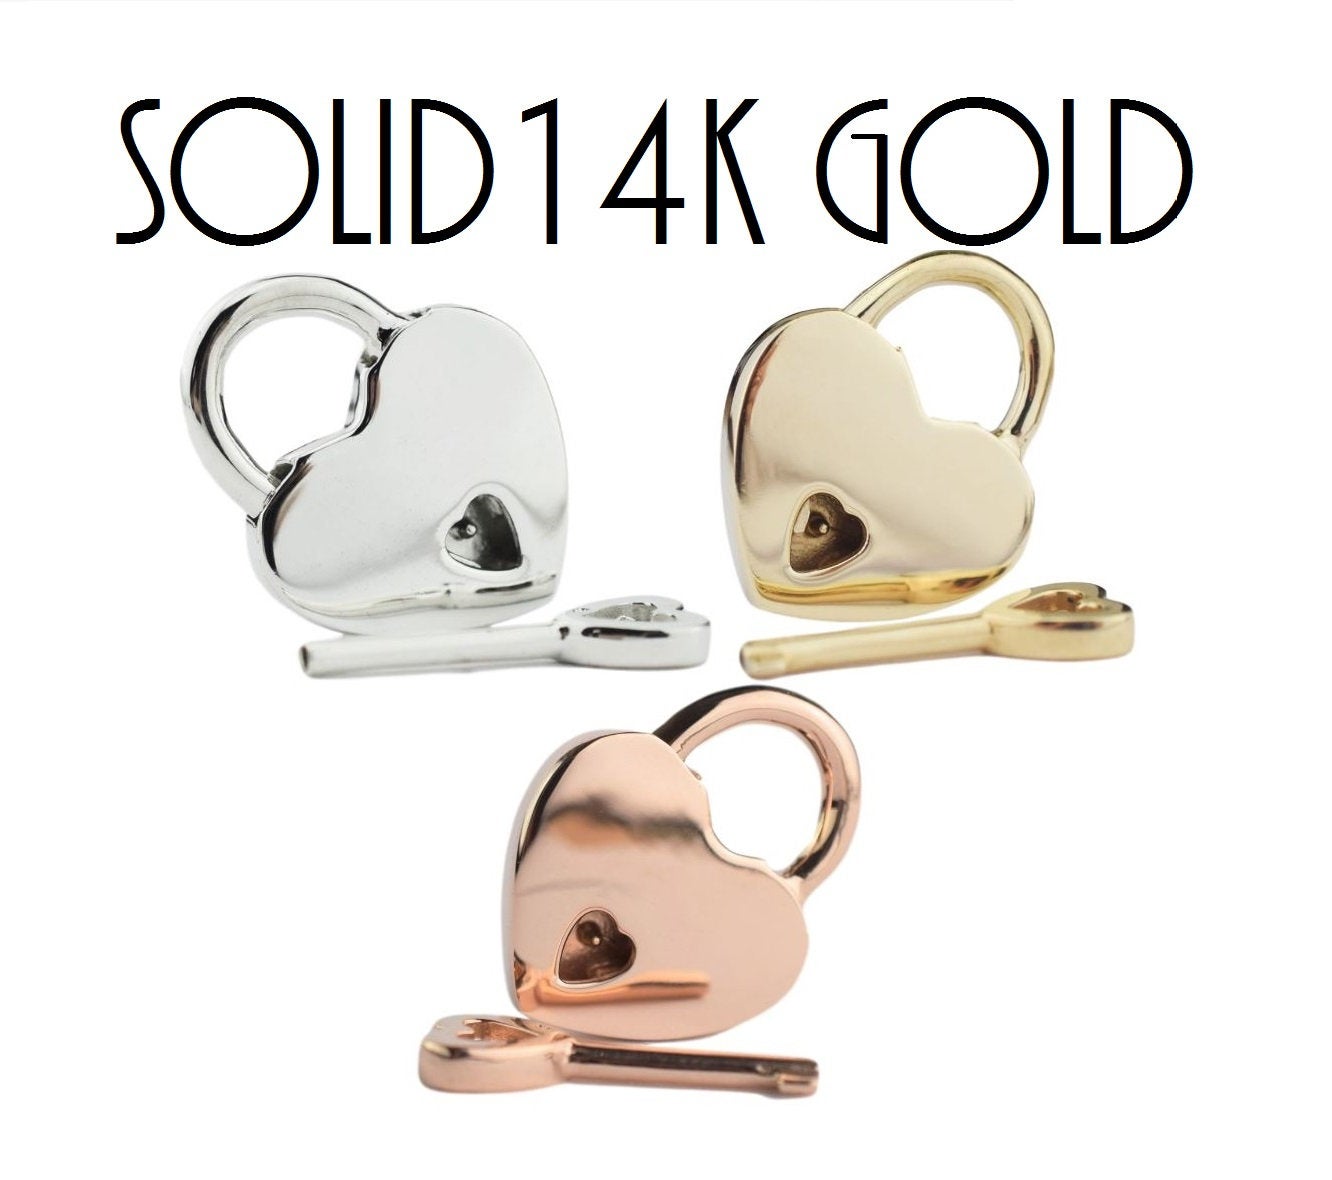 Highest Quality Day Collars in the World! Solid 14K Gold Hypoallergenic Locking, lock, padlock BDSM Cuff Bondage Sub Kink Slave Submissive ToBeHis Engraving